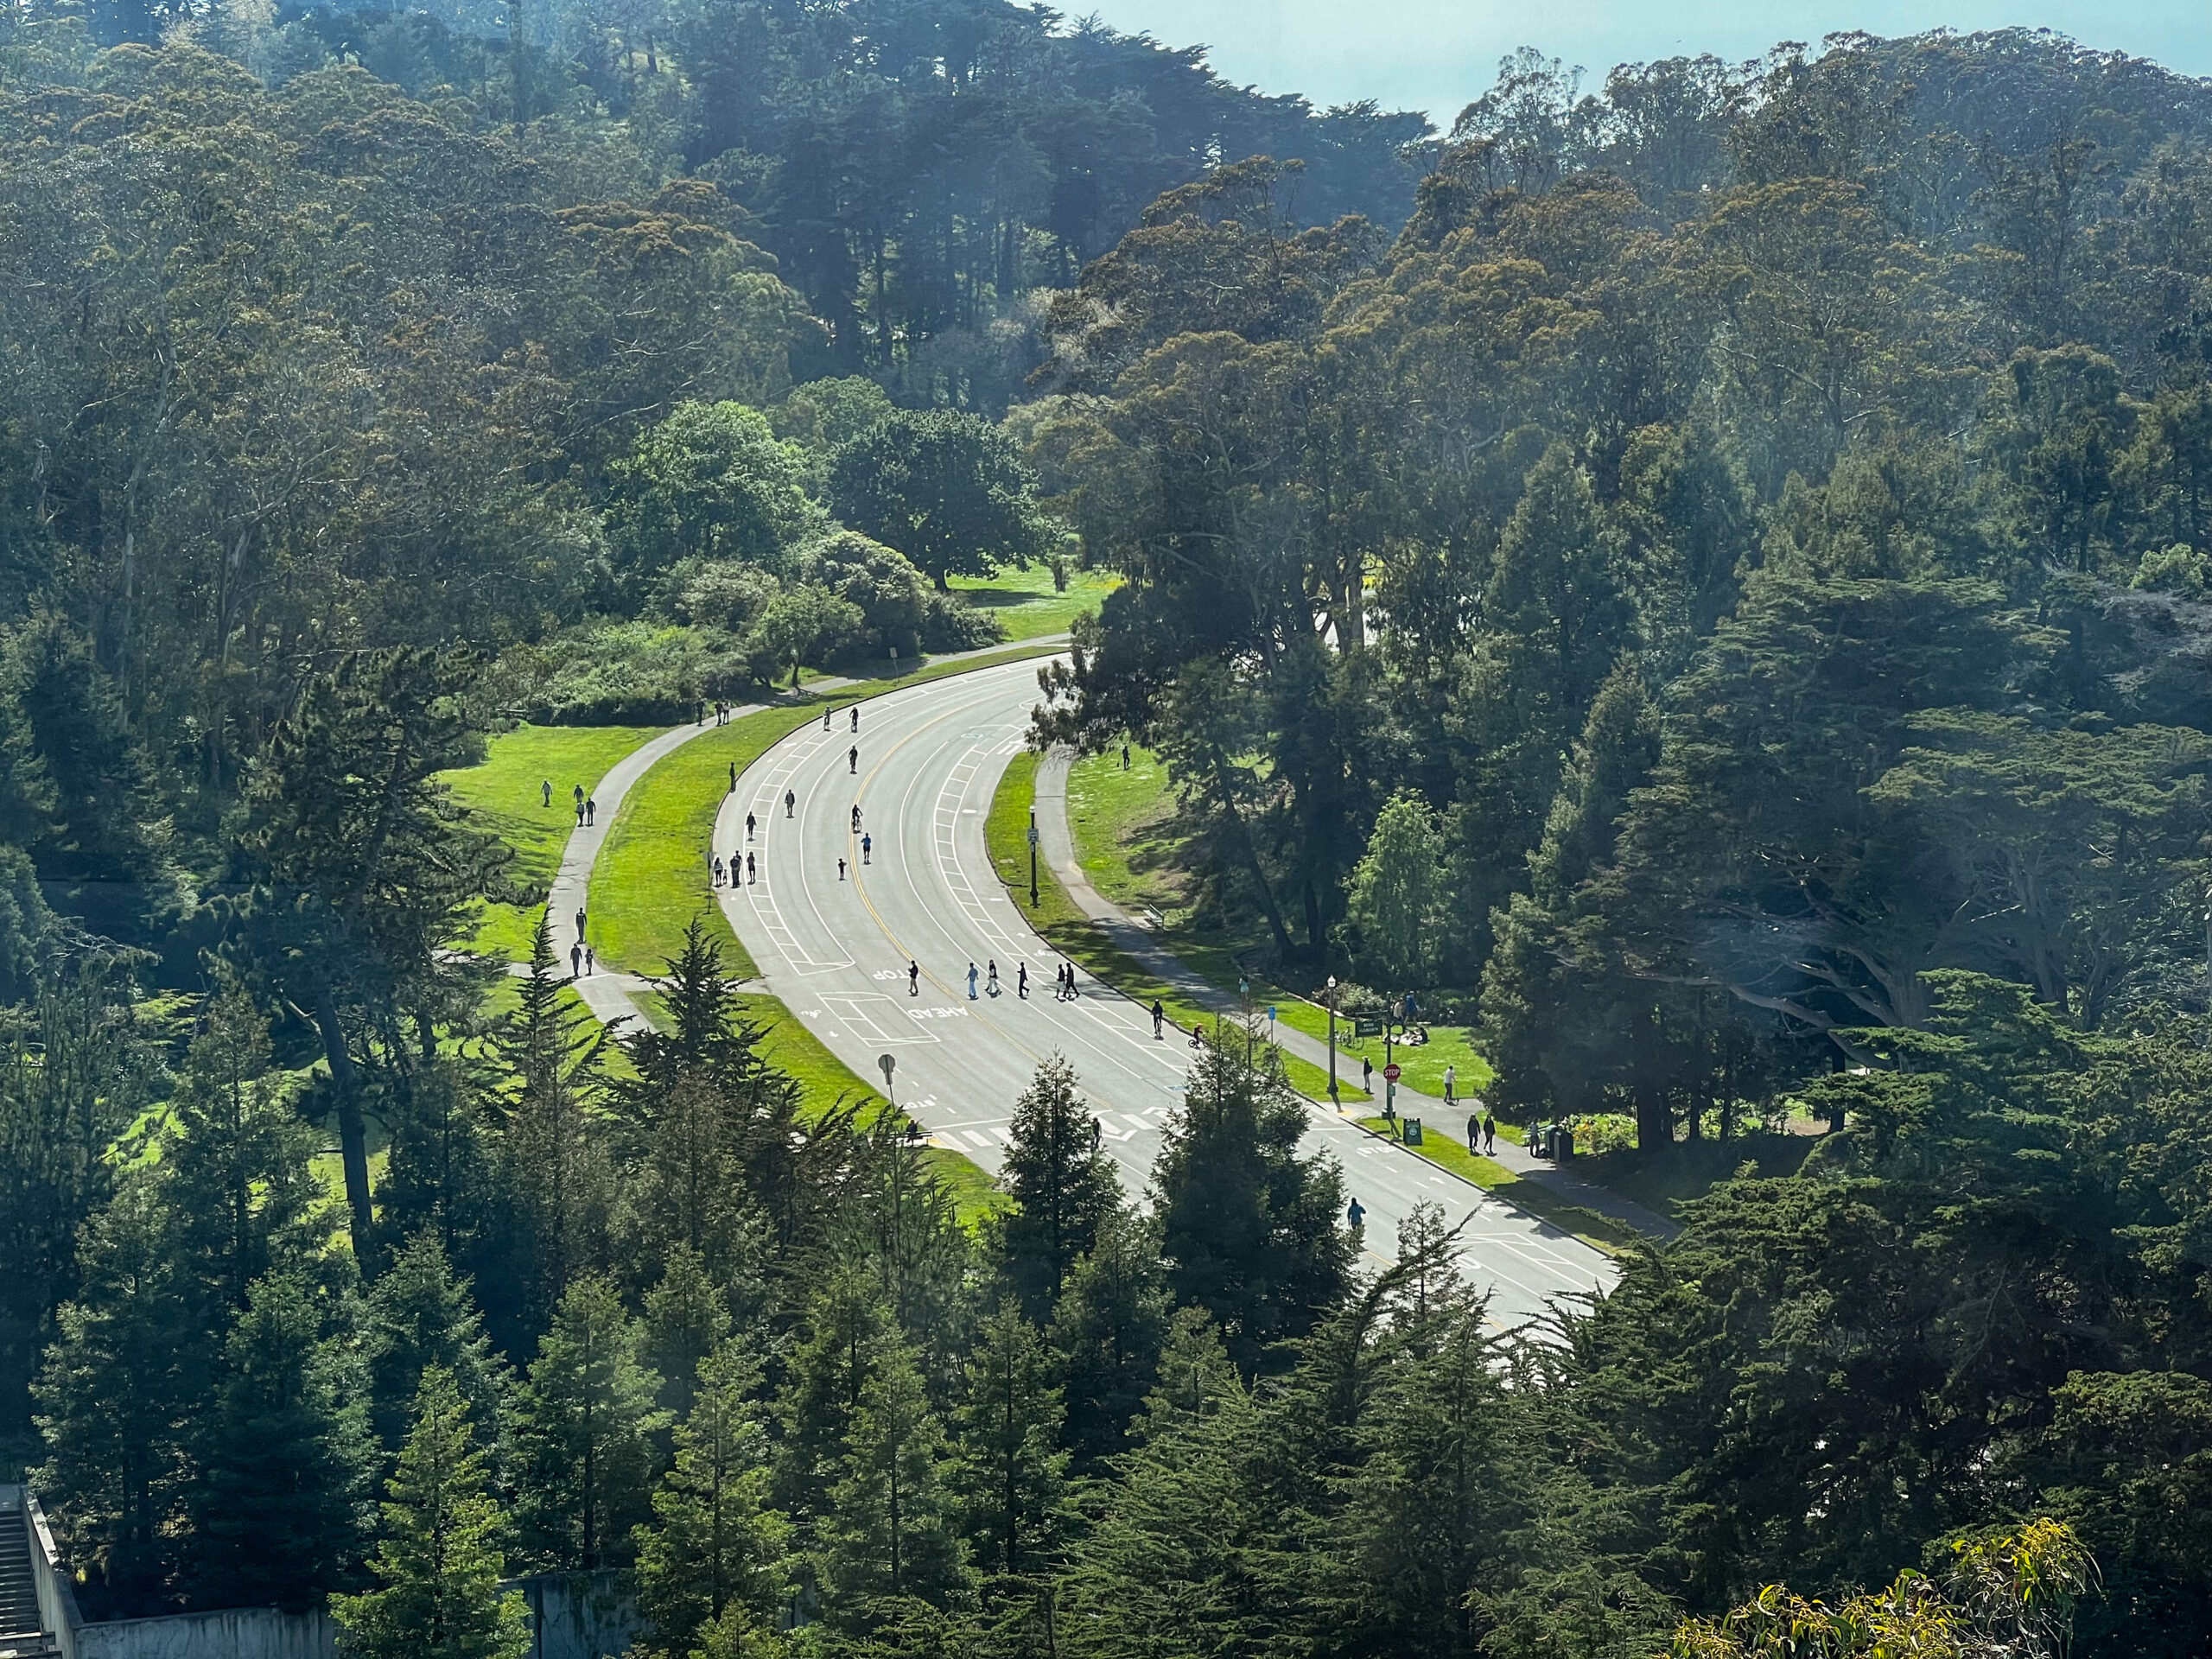 74-Year-Old Found Dead in San Francisco’s Golden Gate Park